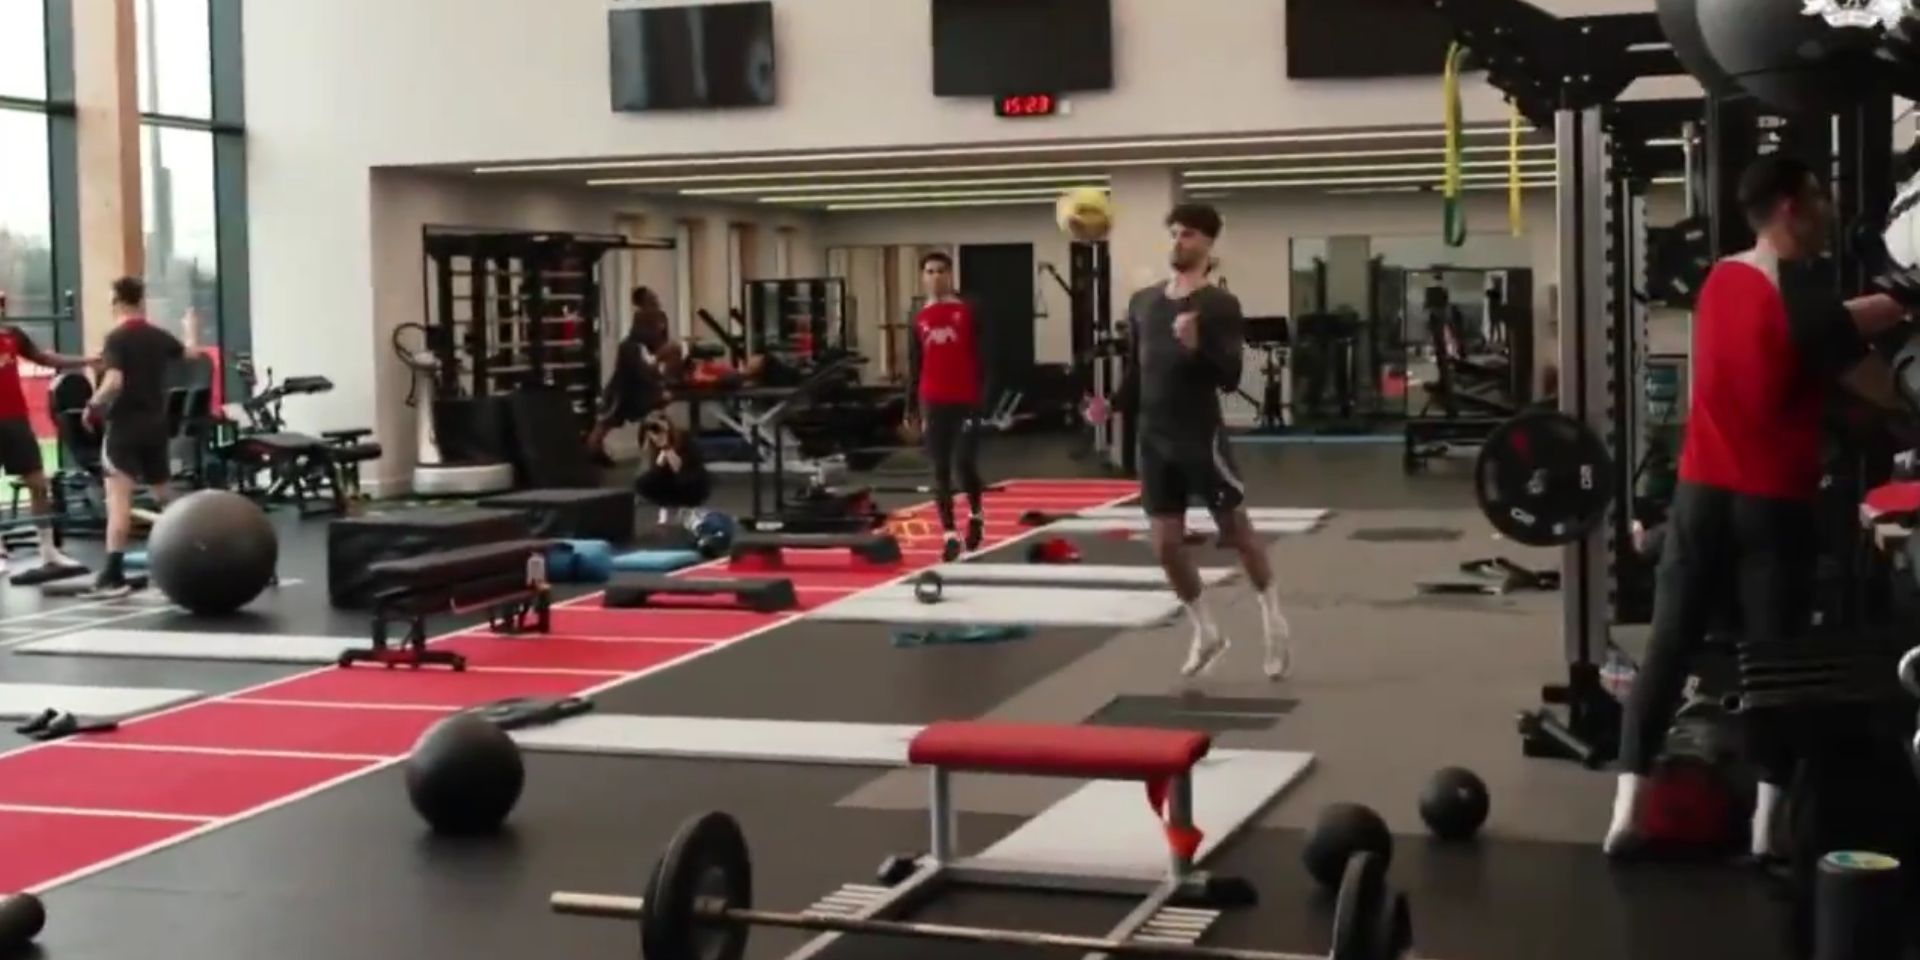 (Video) Salah hillariously tells Szoboszlai and Diaz off for playing football in the gym